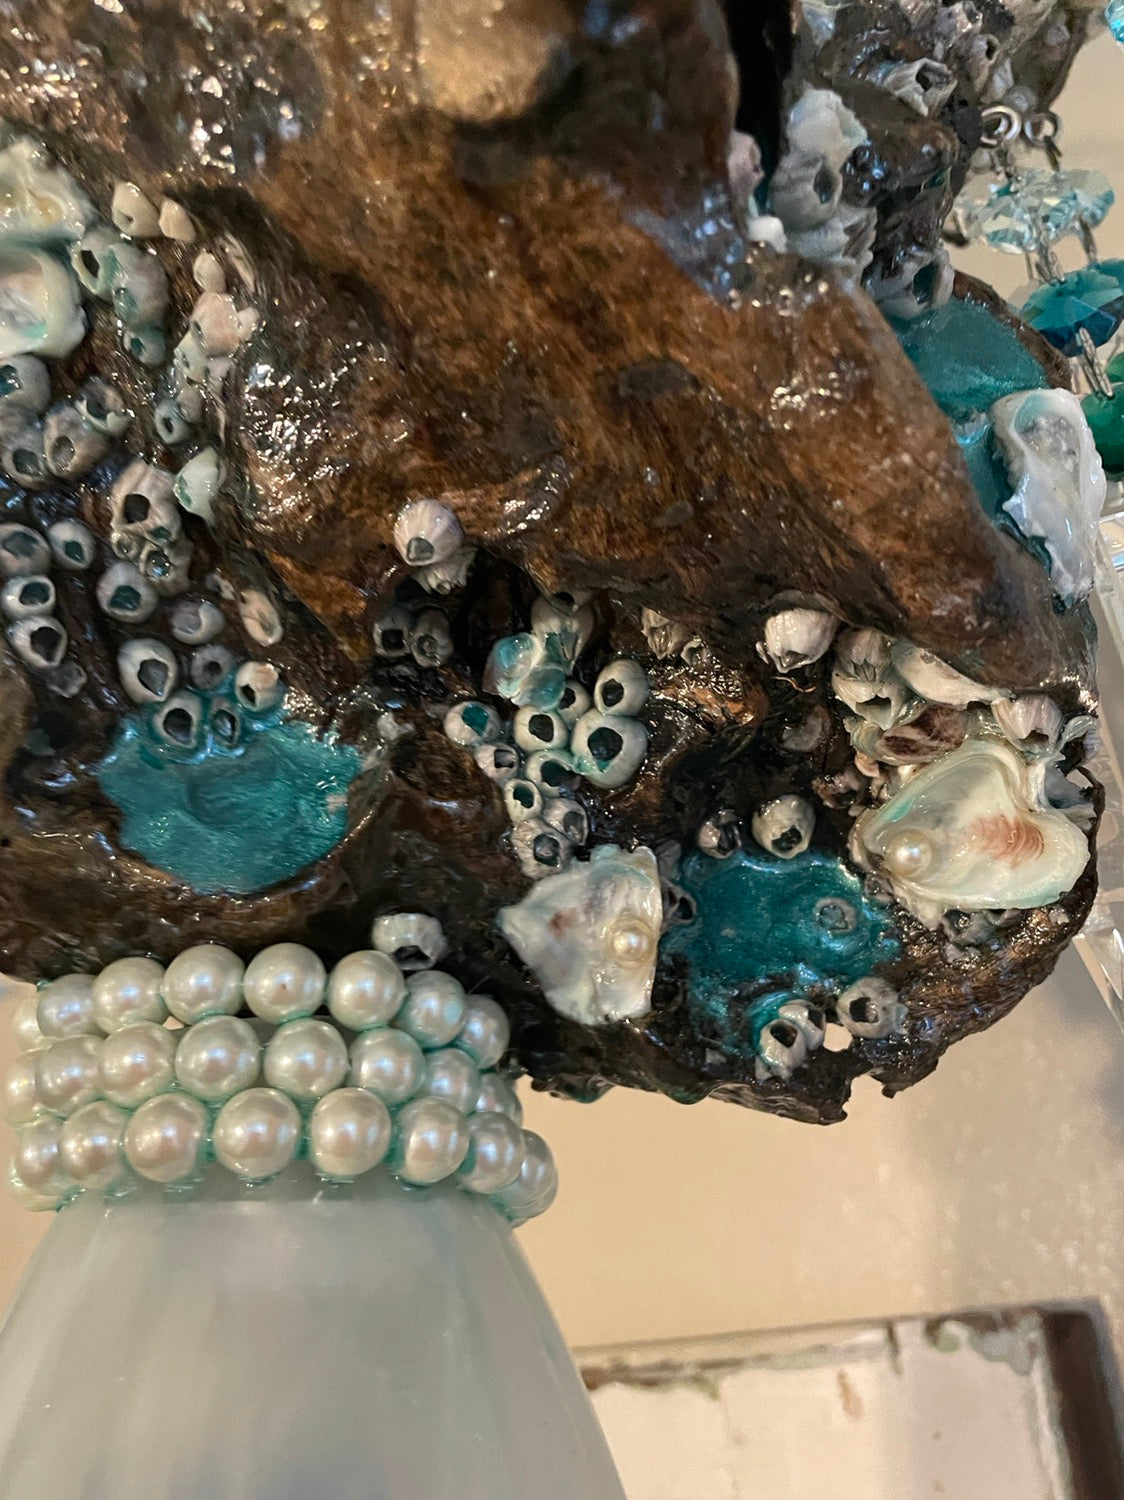 epoxy rein tide-pool barnacles and pearls